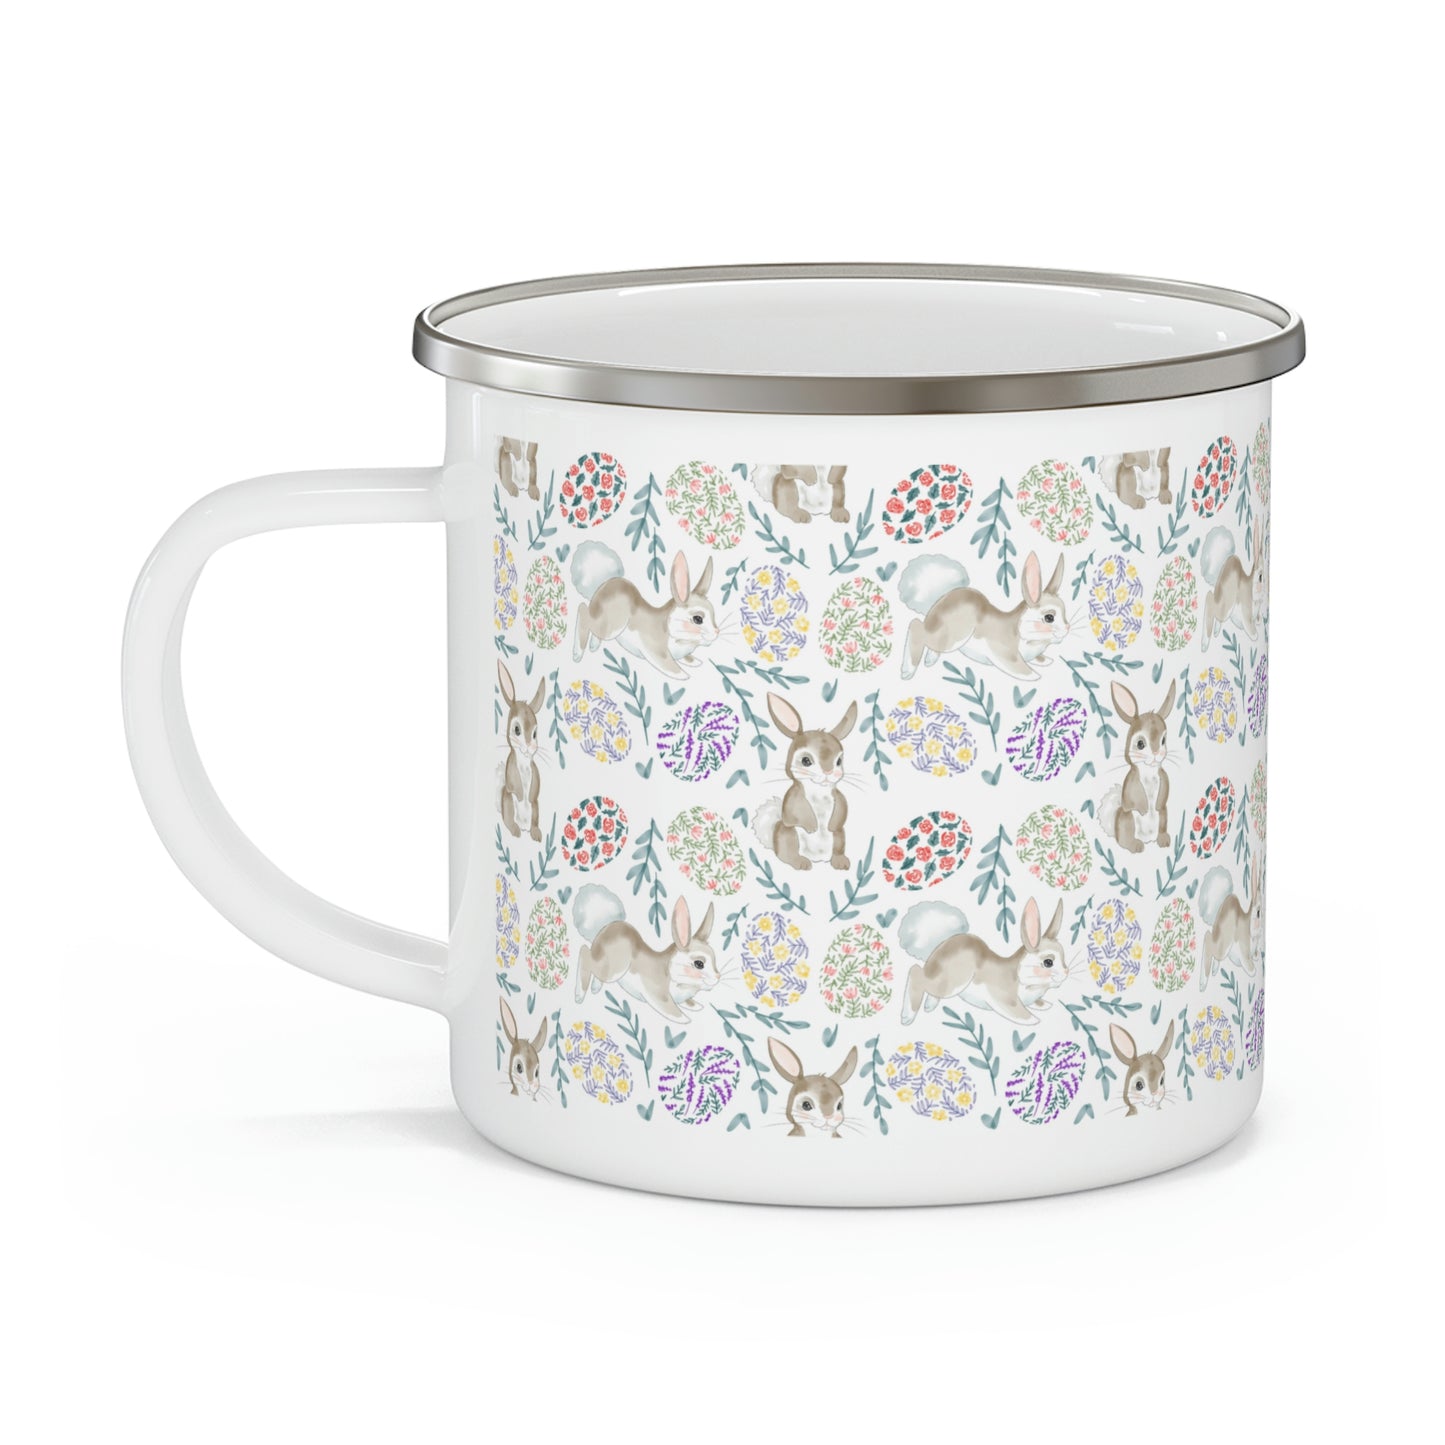 Bunnies and Easter Eggs Stainless Steel Camping Mug